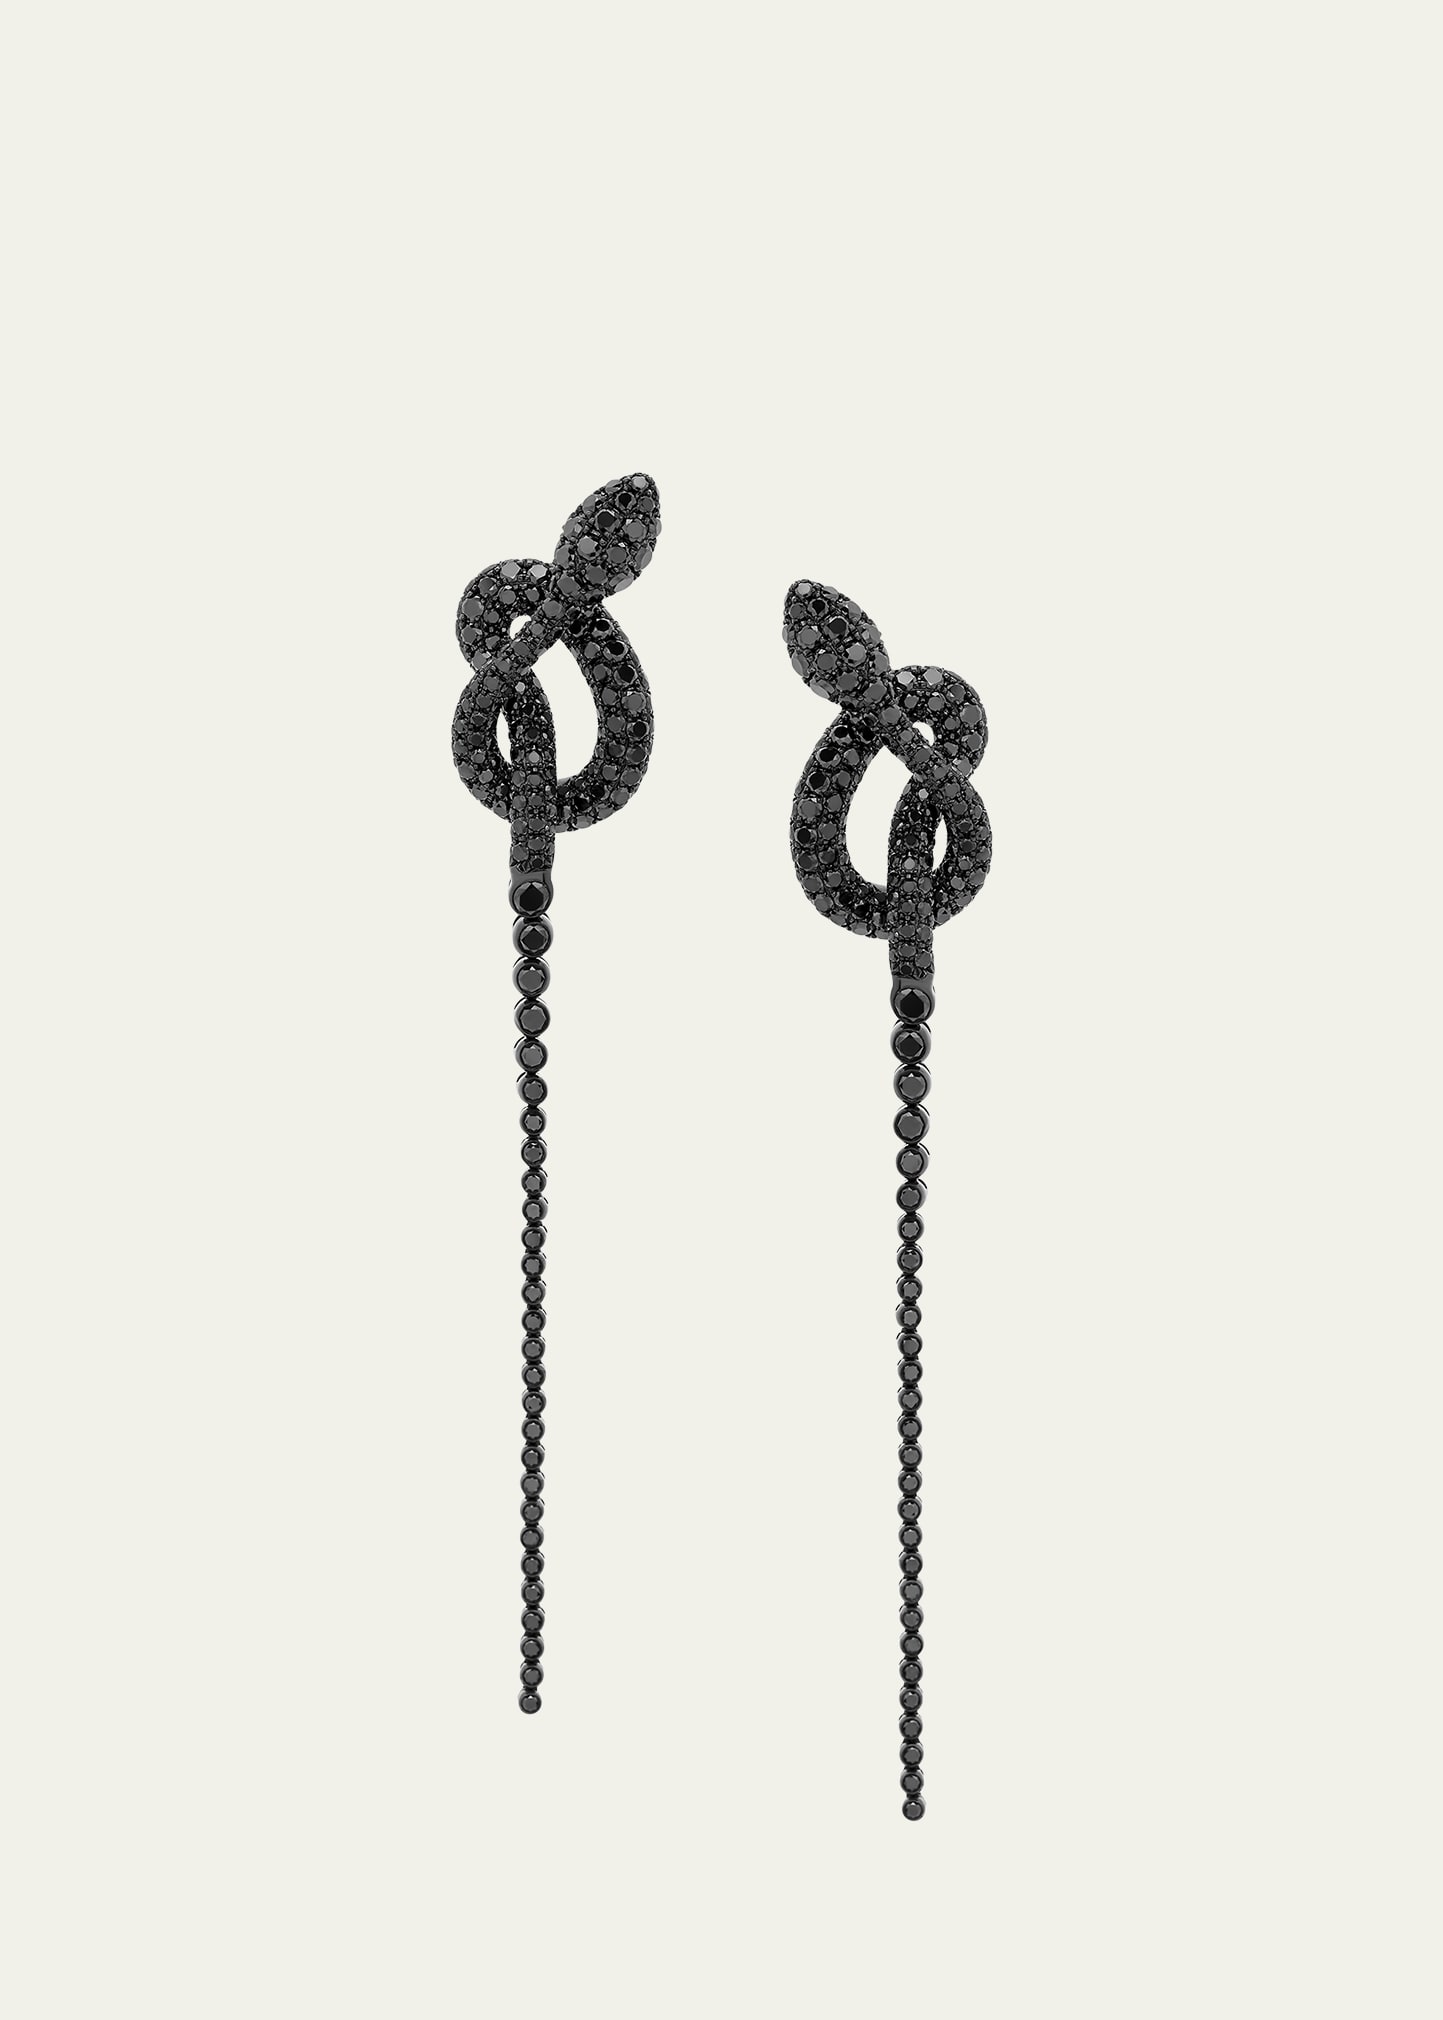 Stefere White Gold Black Diamond Earrings from The Snake Collection